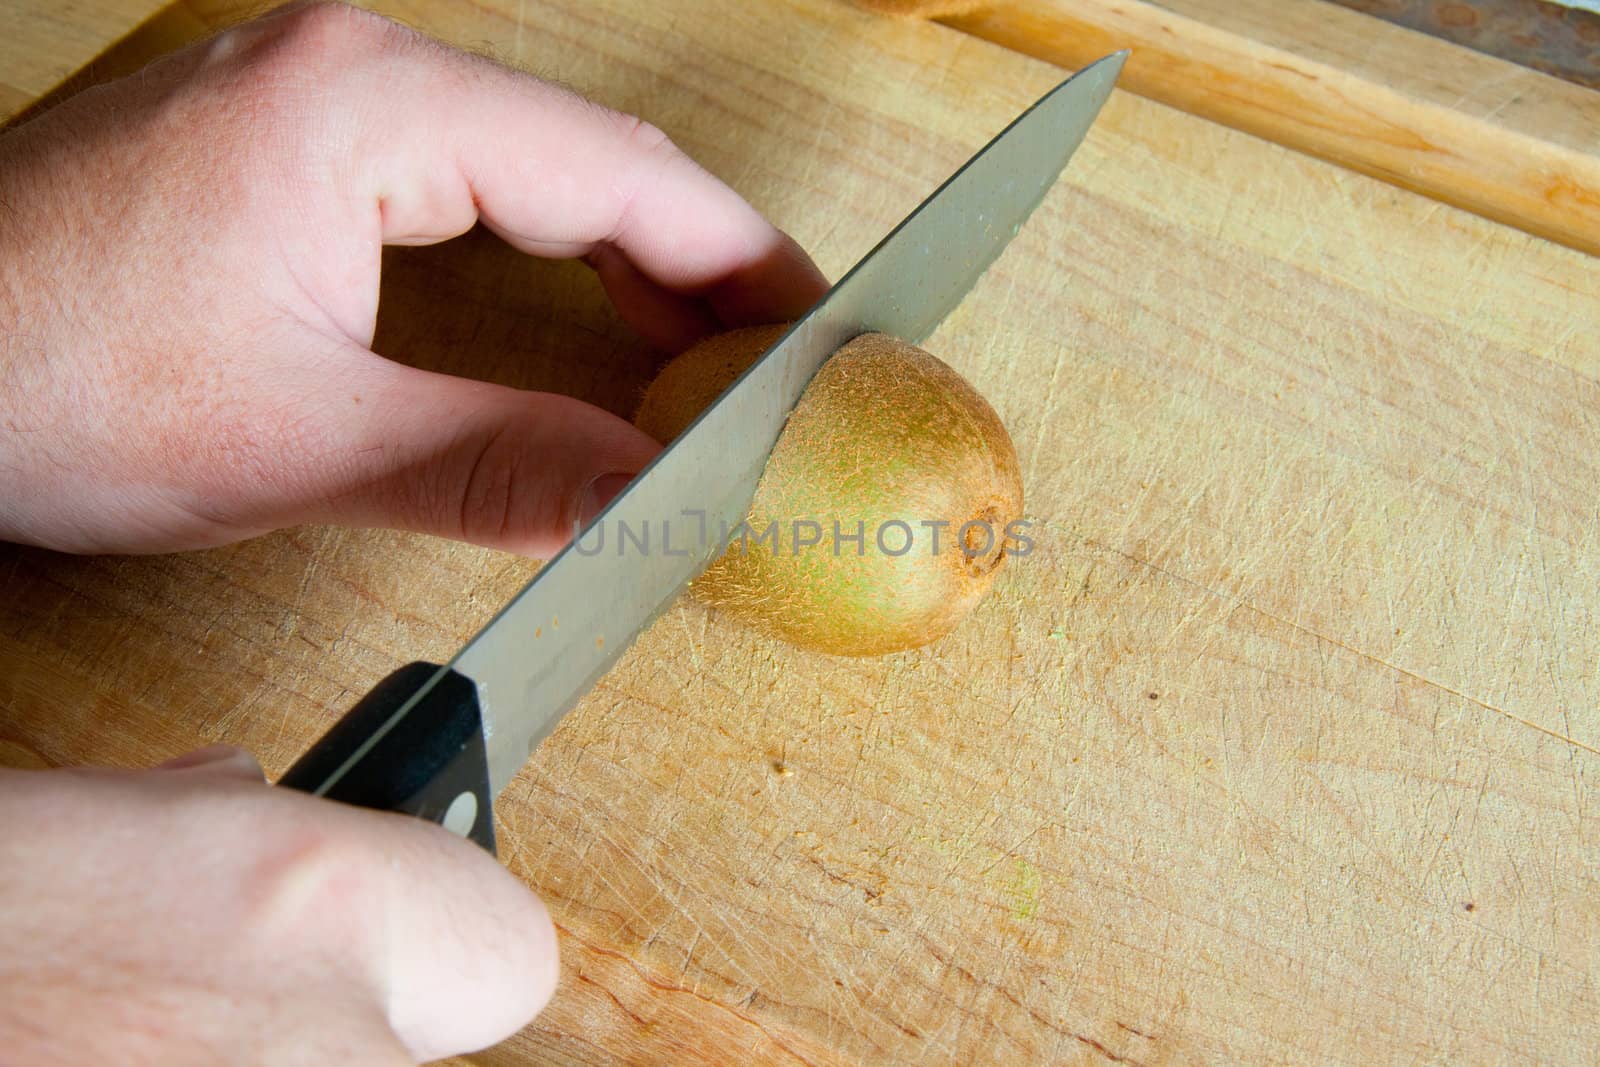 A man slices a kiwi fruit on a cutting board to prepare a breakfast meal.